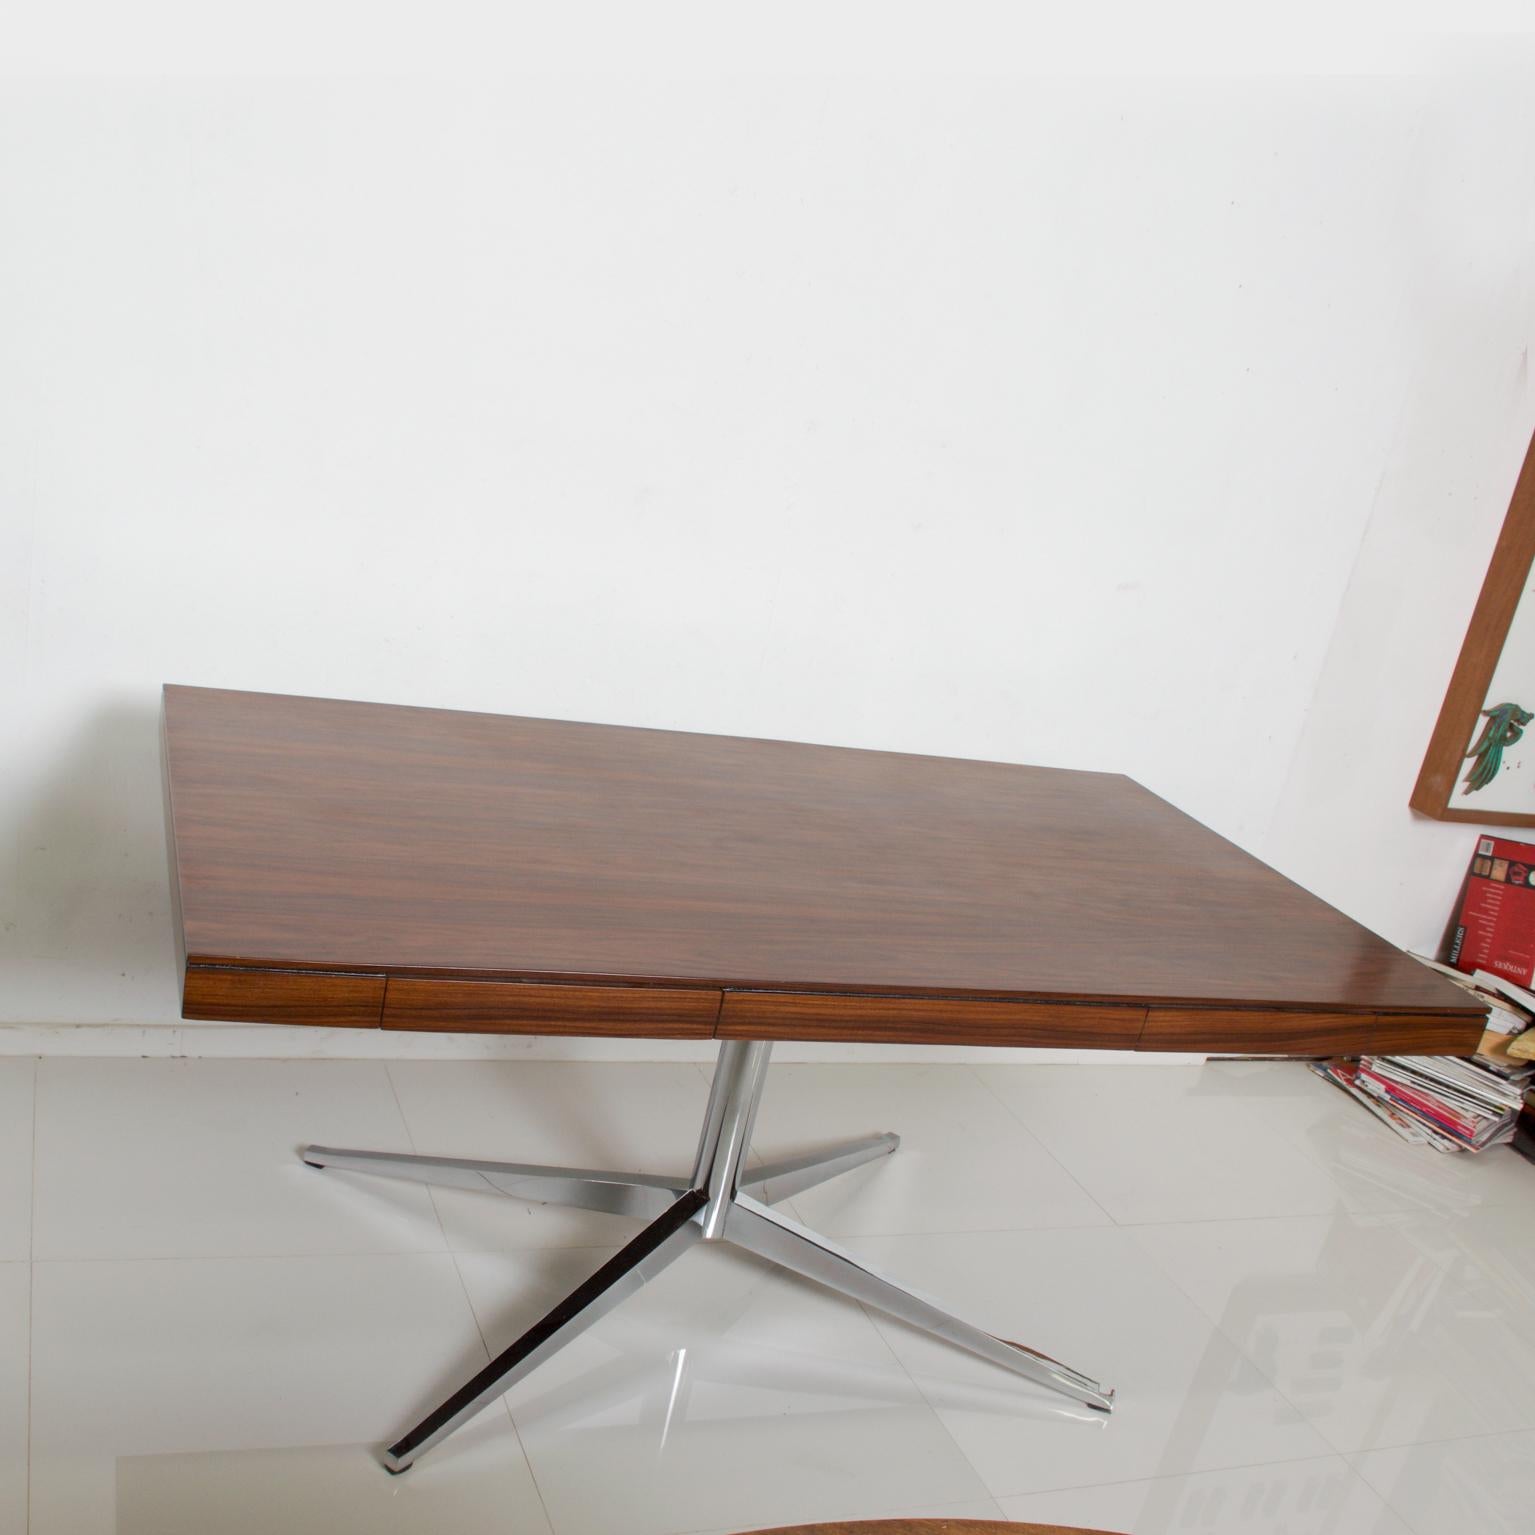 Florence KNOLL Executive Partners DESK Rosewood w/ Chrome Legs Refined Classic 3